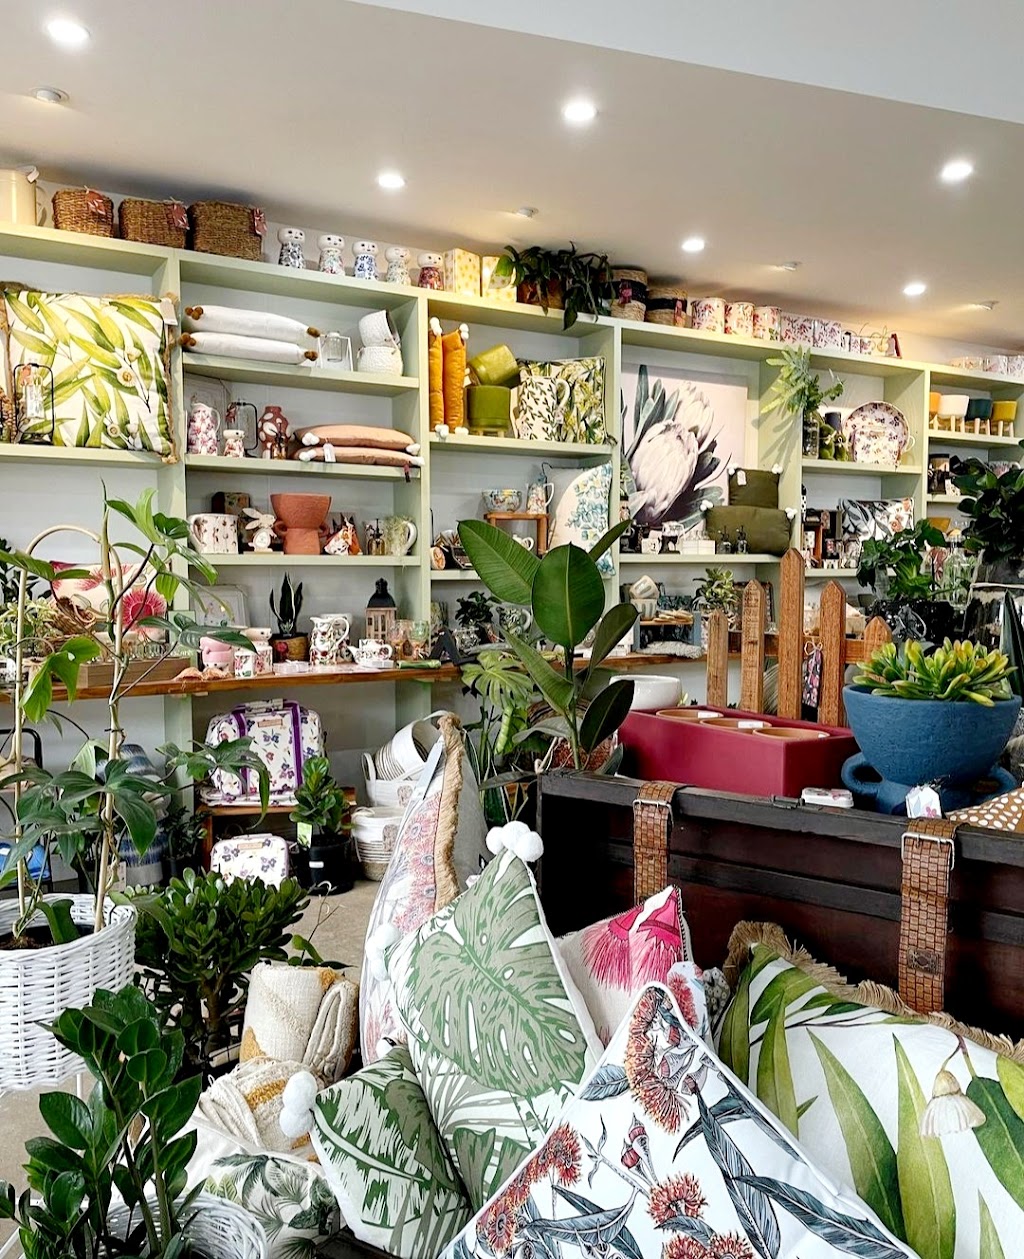 Hennessy Home and Garden | home goods store | 137 Main St, Rutherglen VIC 3685, Australia | 0422069962 OR +61 422 069 962